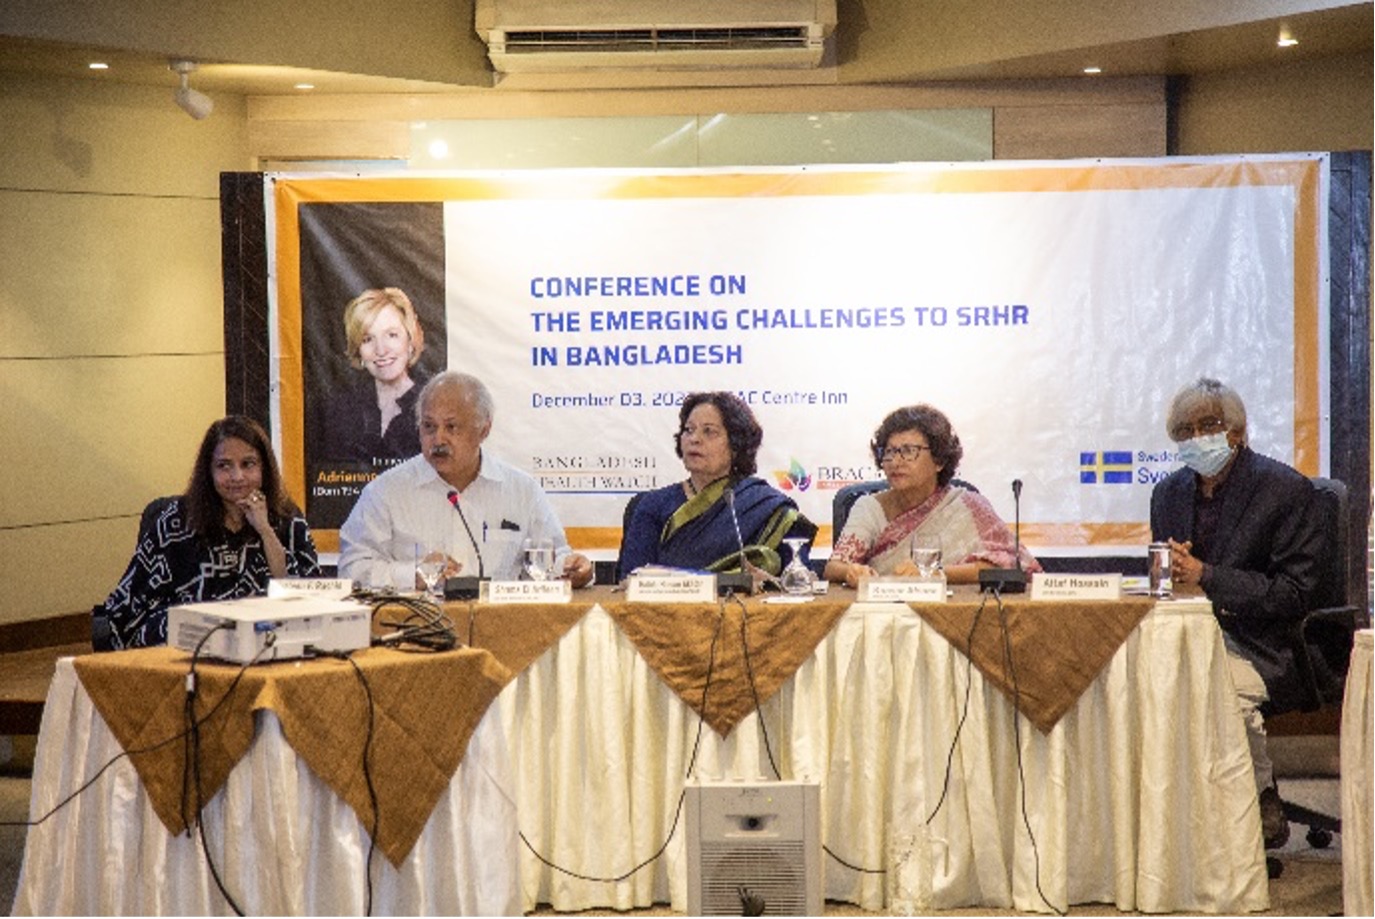 Conference on “The Emerging Challenges to Sexual and Reproductive Health and Rights (SRHR) in Bangladesh”